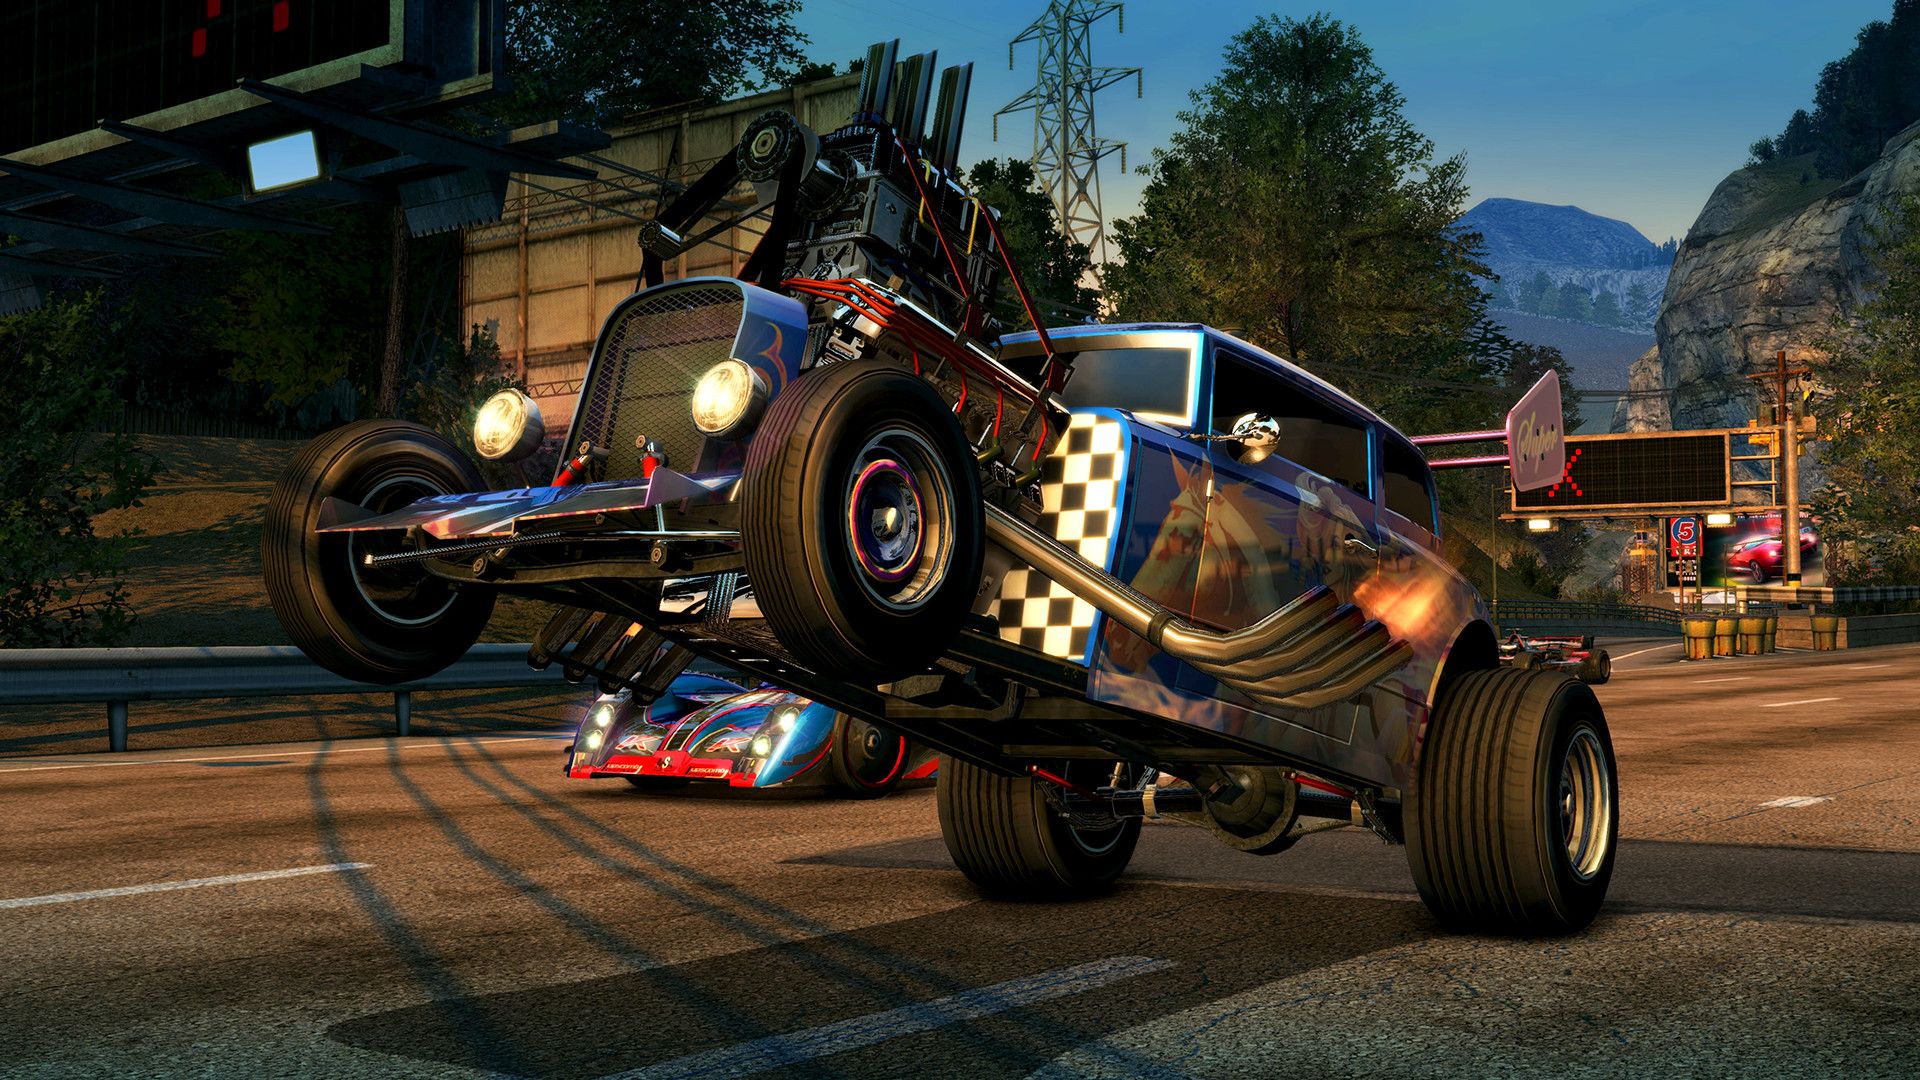 Criterion Would "Love" To Make A New Burnout Game